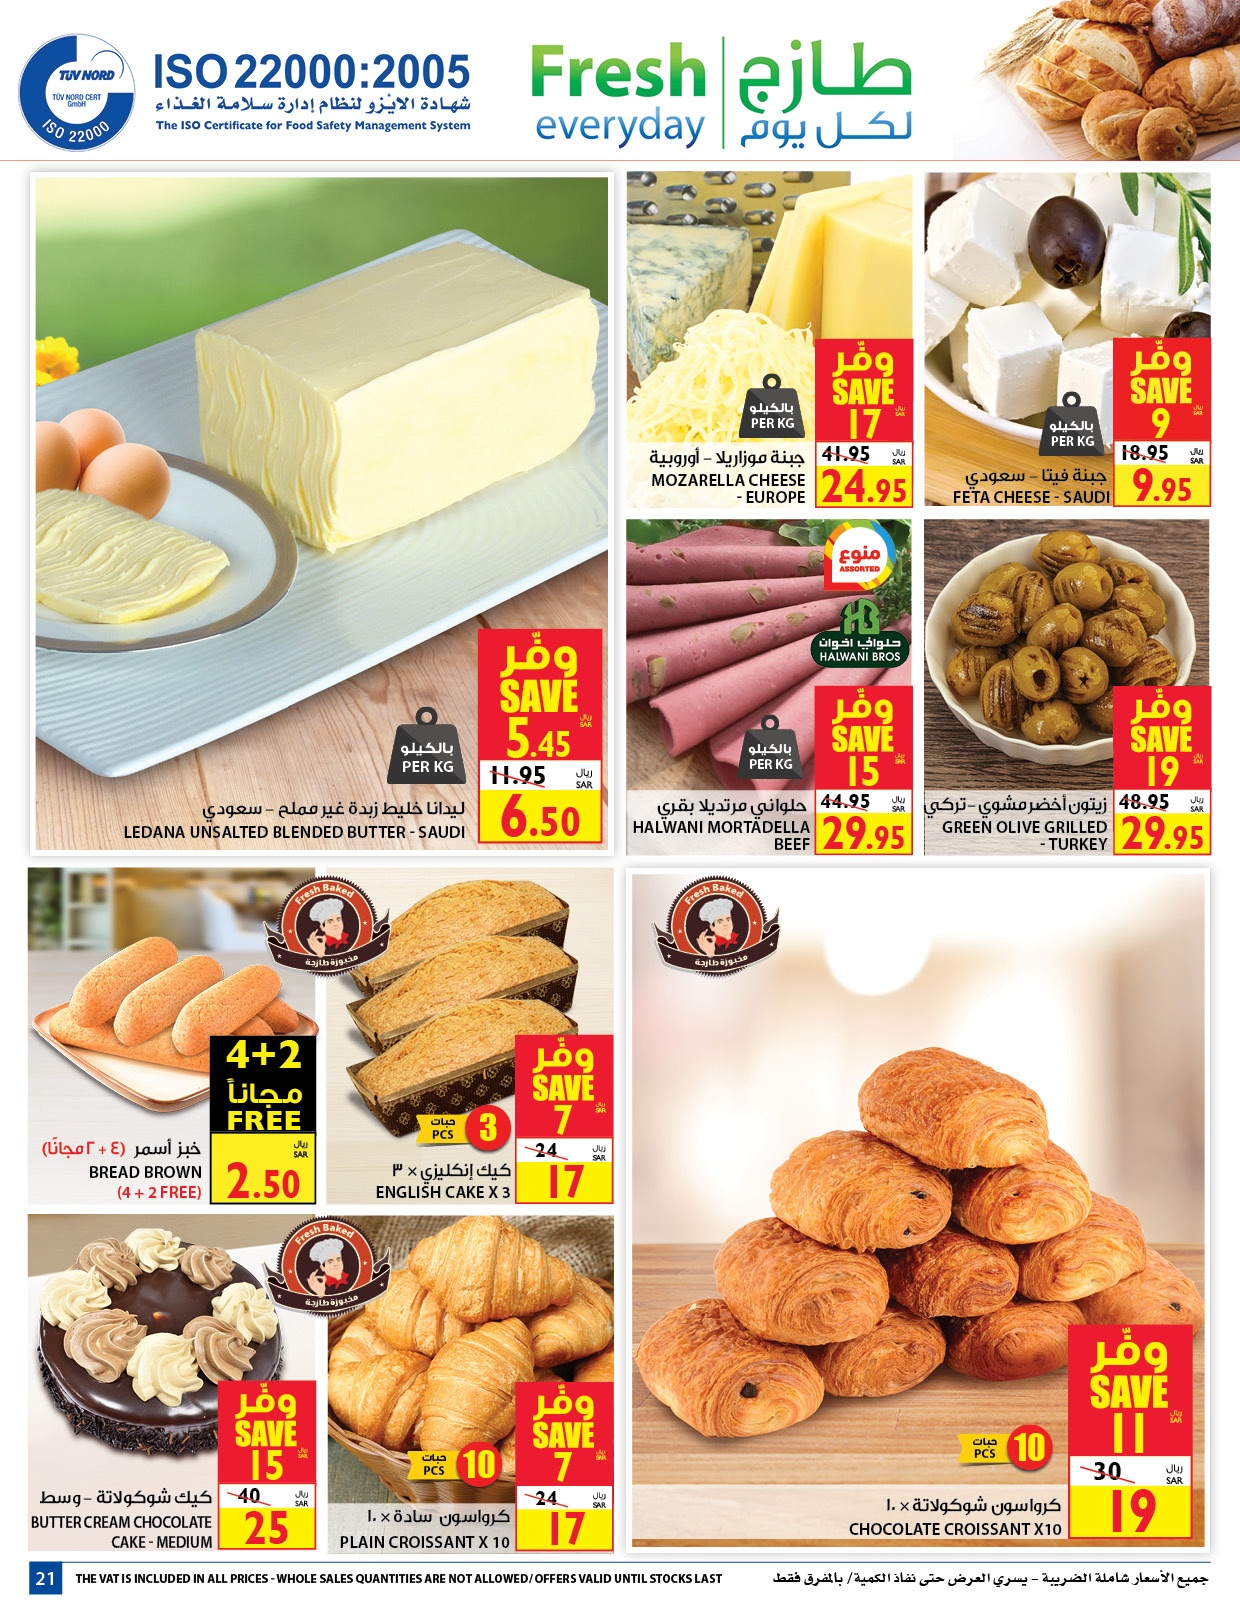 Carrefour Festival Offers from 12/8 till 25/8 | Carrefour KSA 22